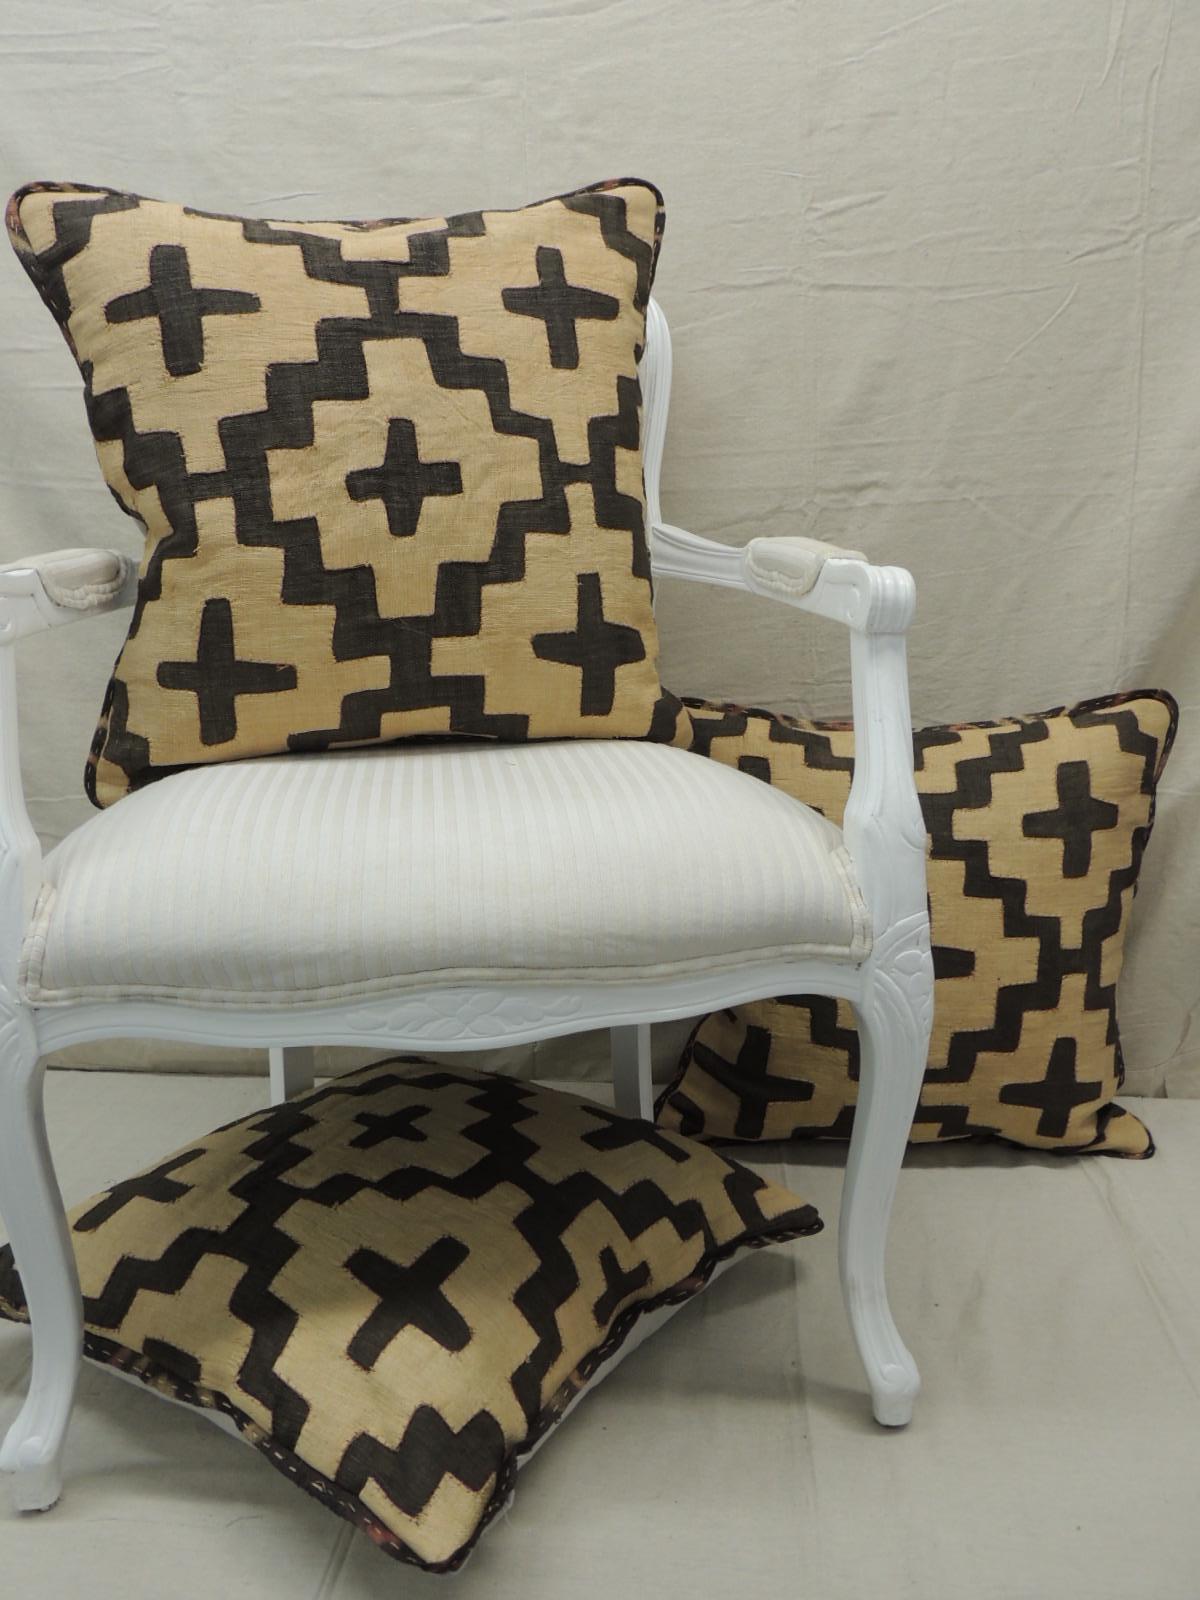 Mid-20th Century Vintage KUBA Tan and Black Handwoven Patchwork African Decorative Pillow